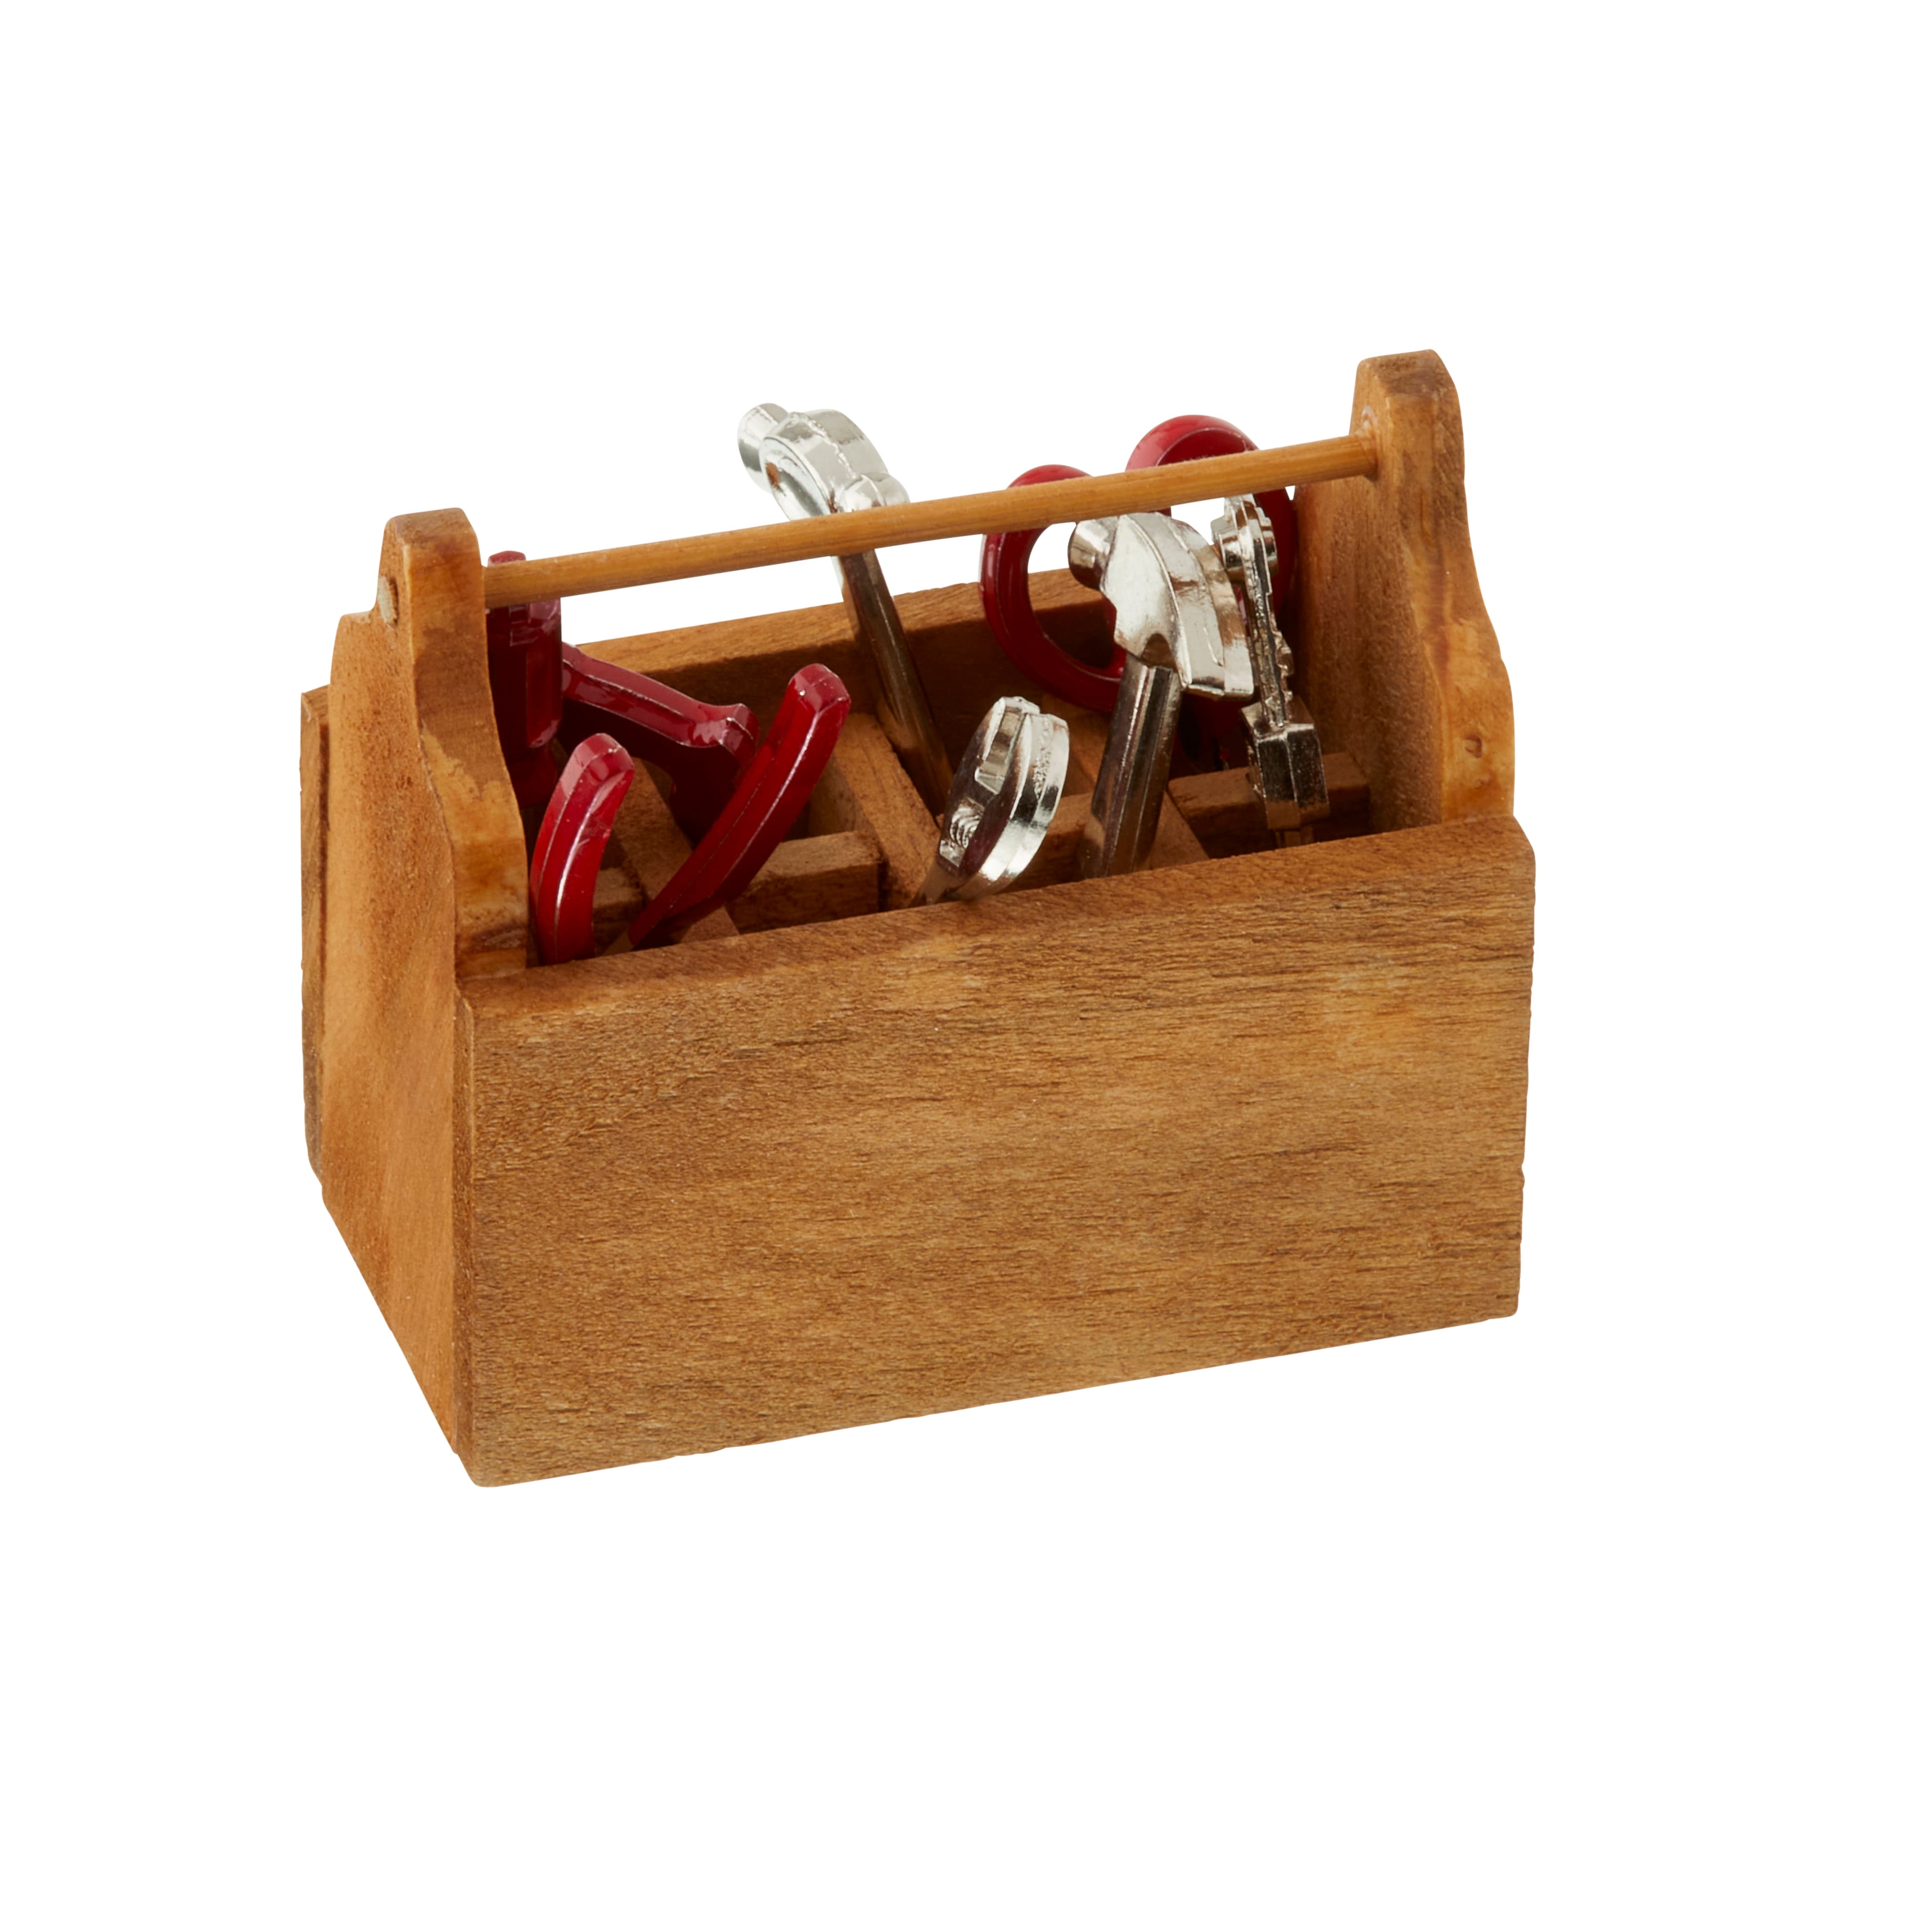 Miniature Tool Box With Simulated Drawers 